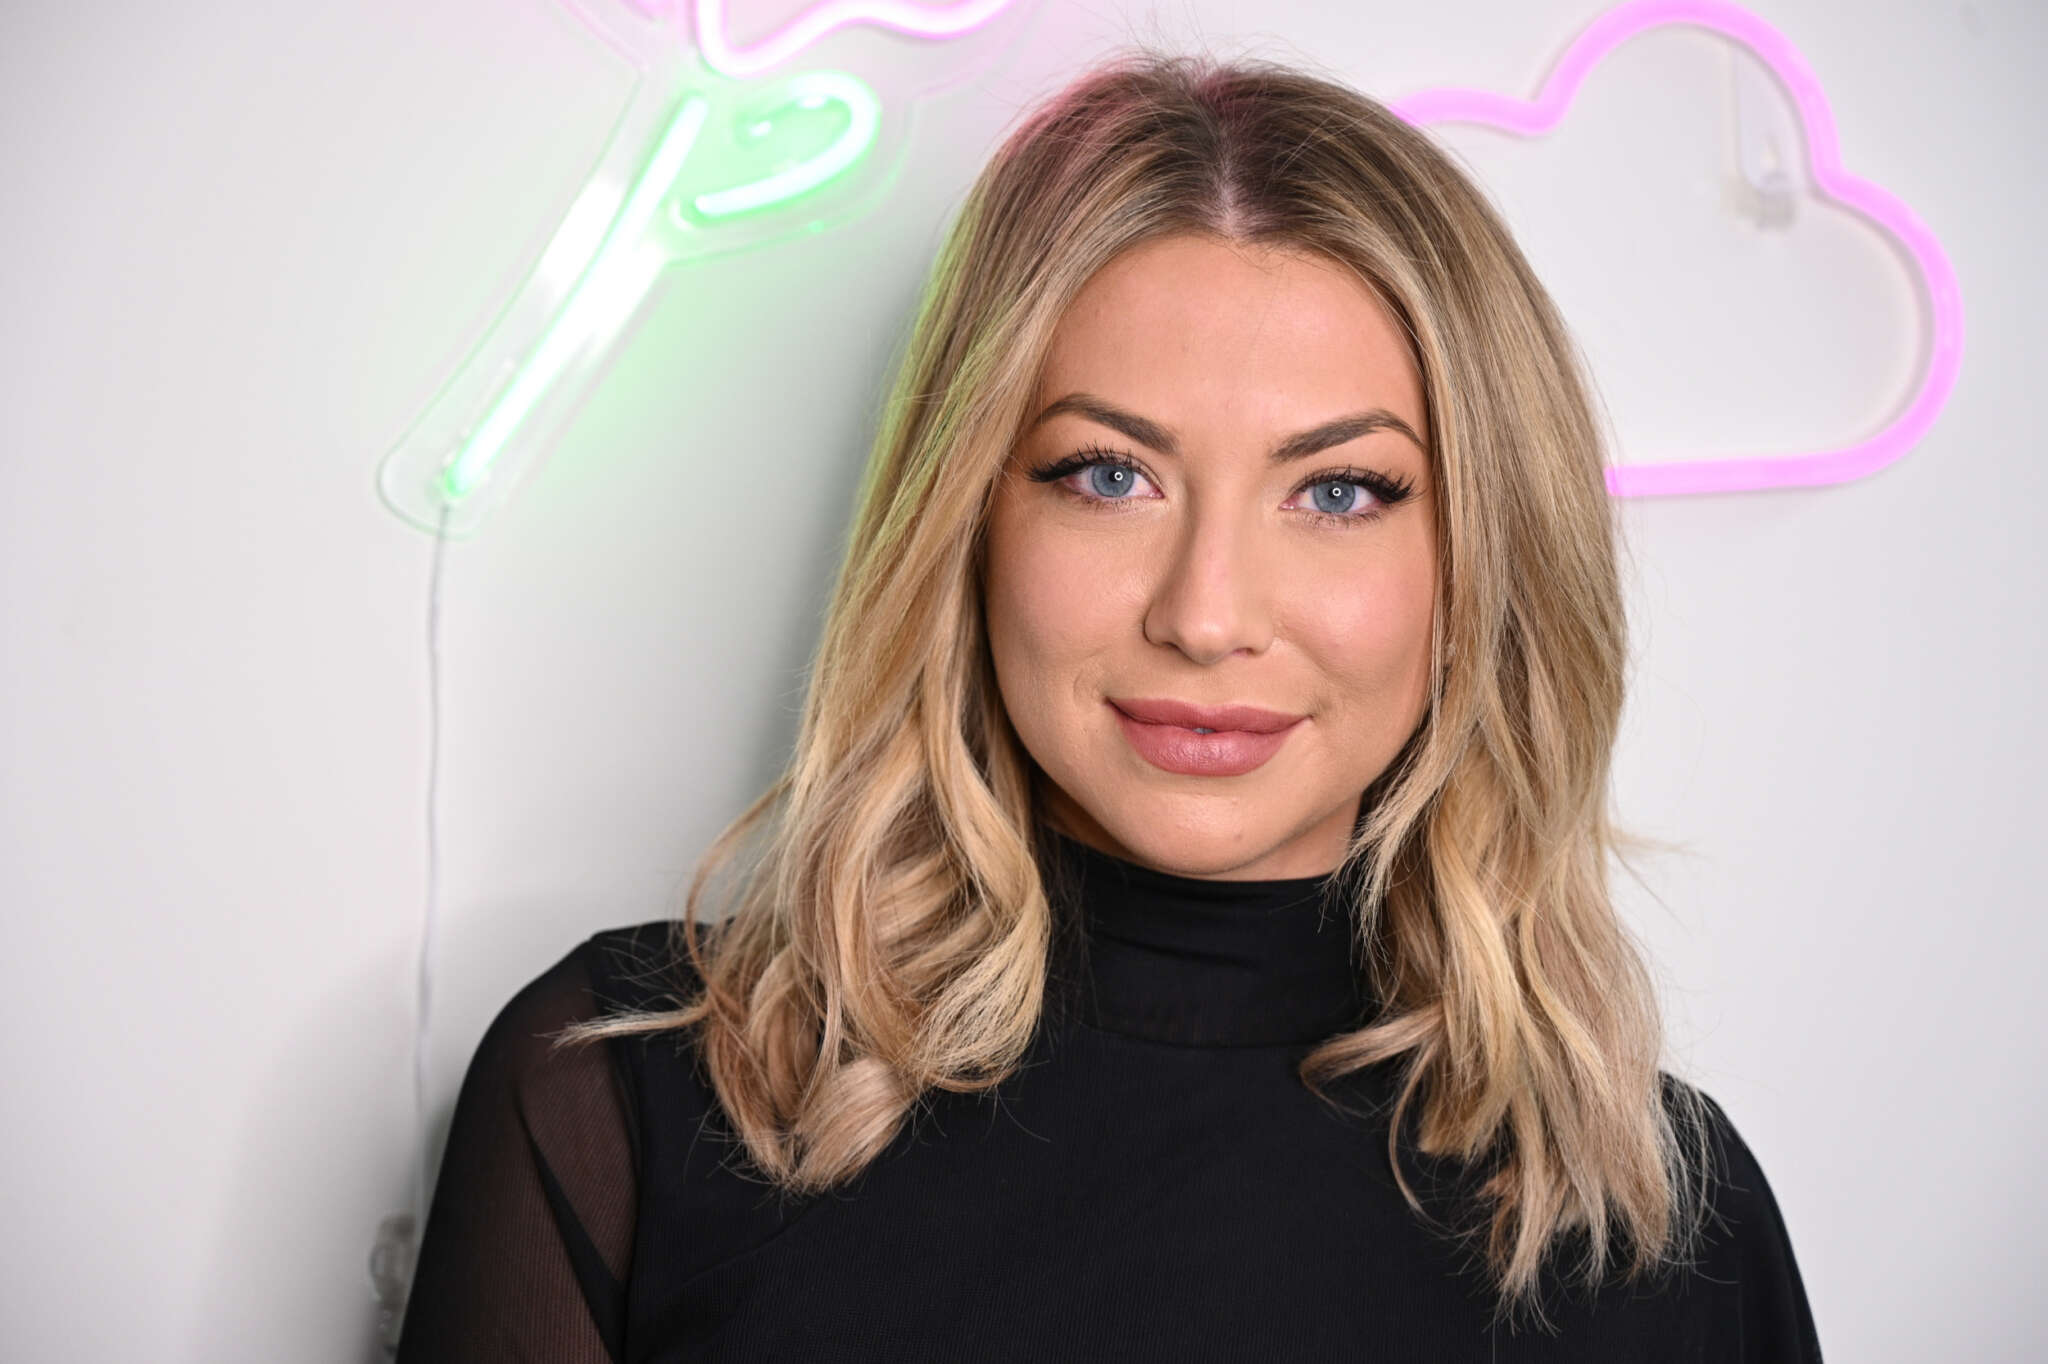 Stassi Schroeder Opens Up About Her Struggles With Getting Back In Shape After Giving Birth – Pic!